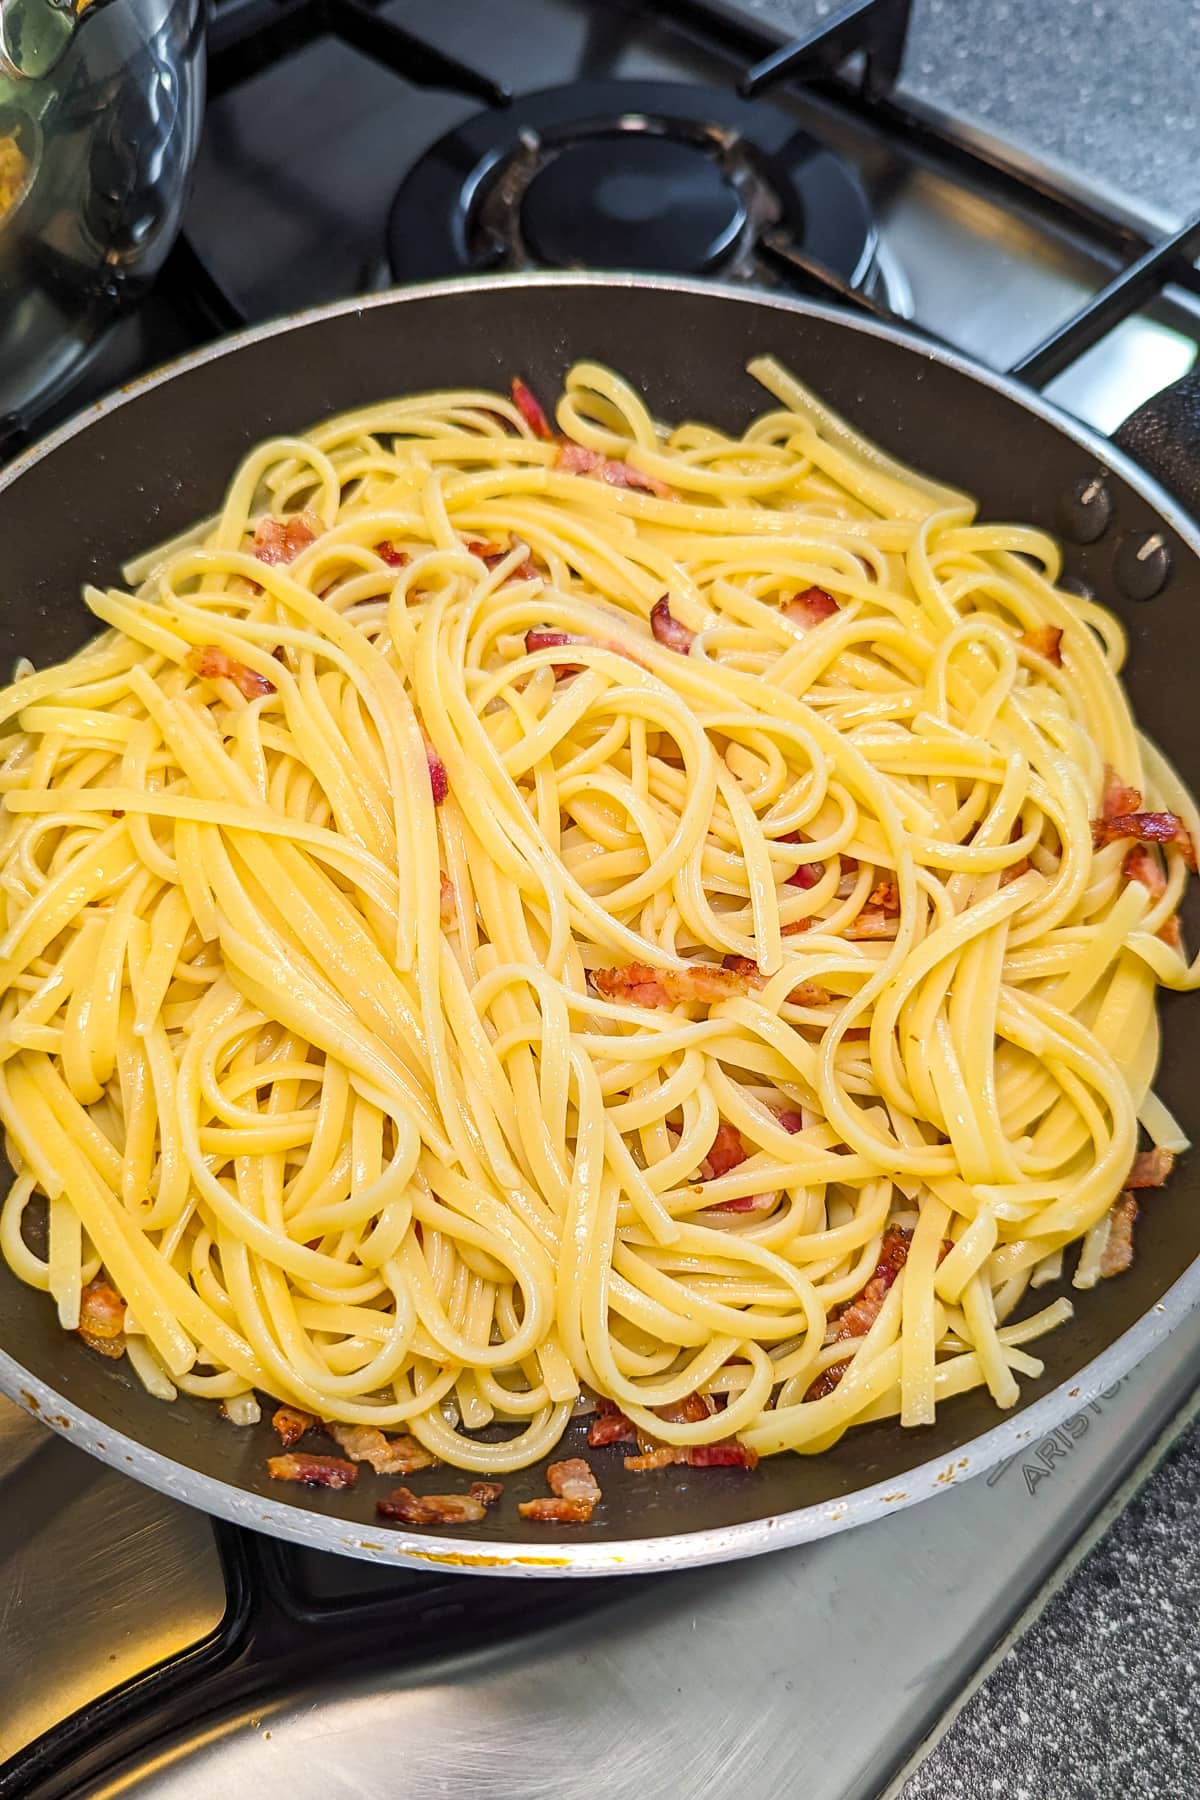 Carbonara sauce pasta in a frying pan on the stove.